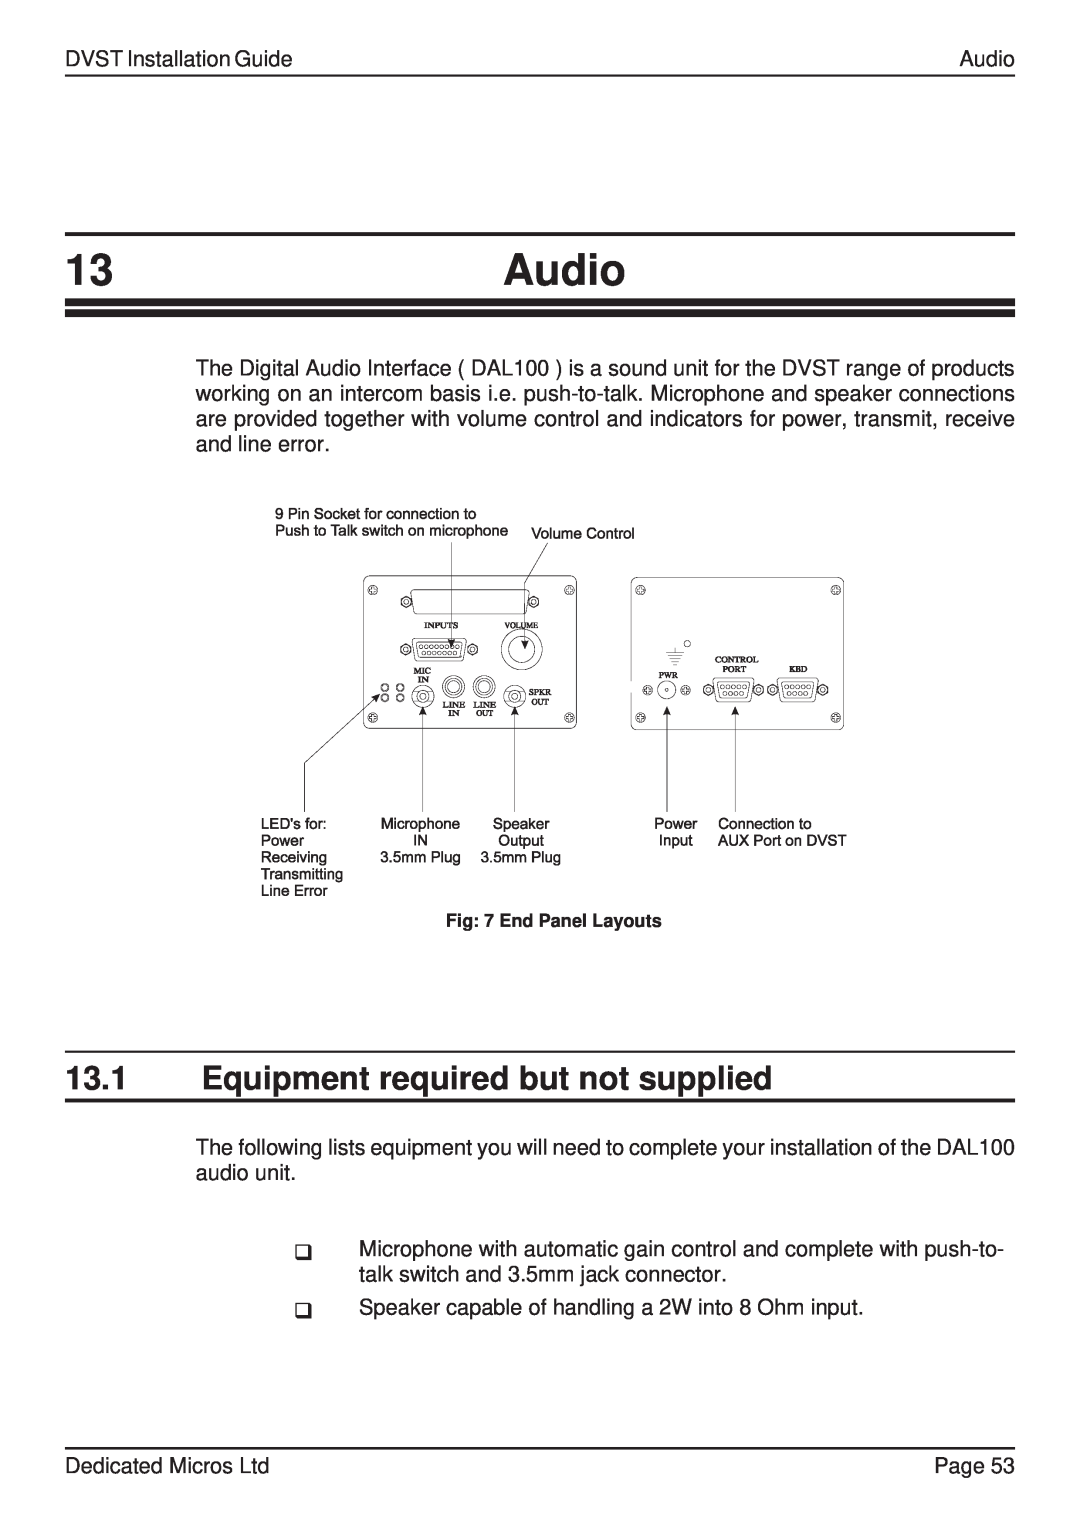 Guardian Technologies DFT 150/175, DVST manual 13Audio, 13.1Equipment required but not supplied 